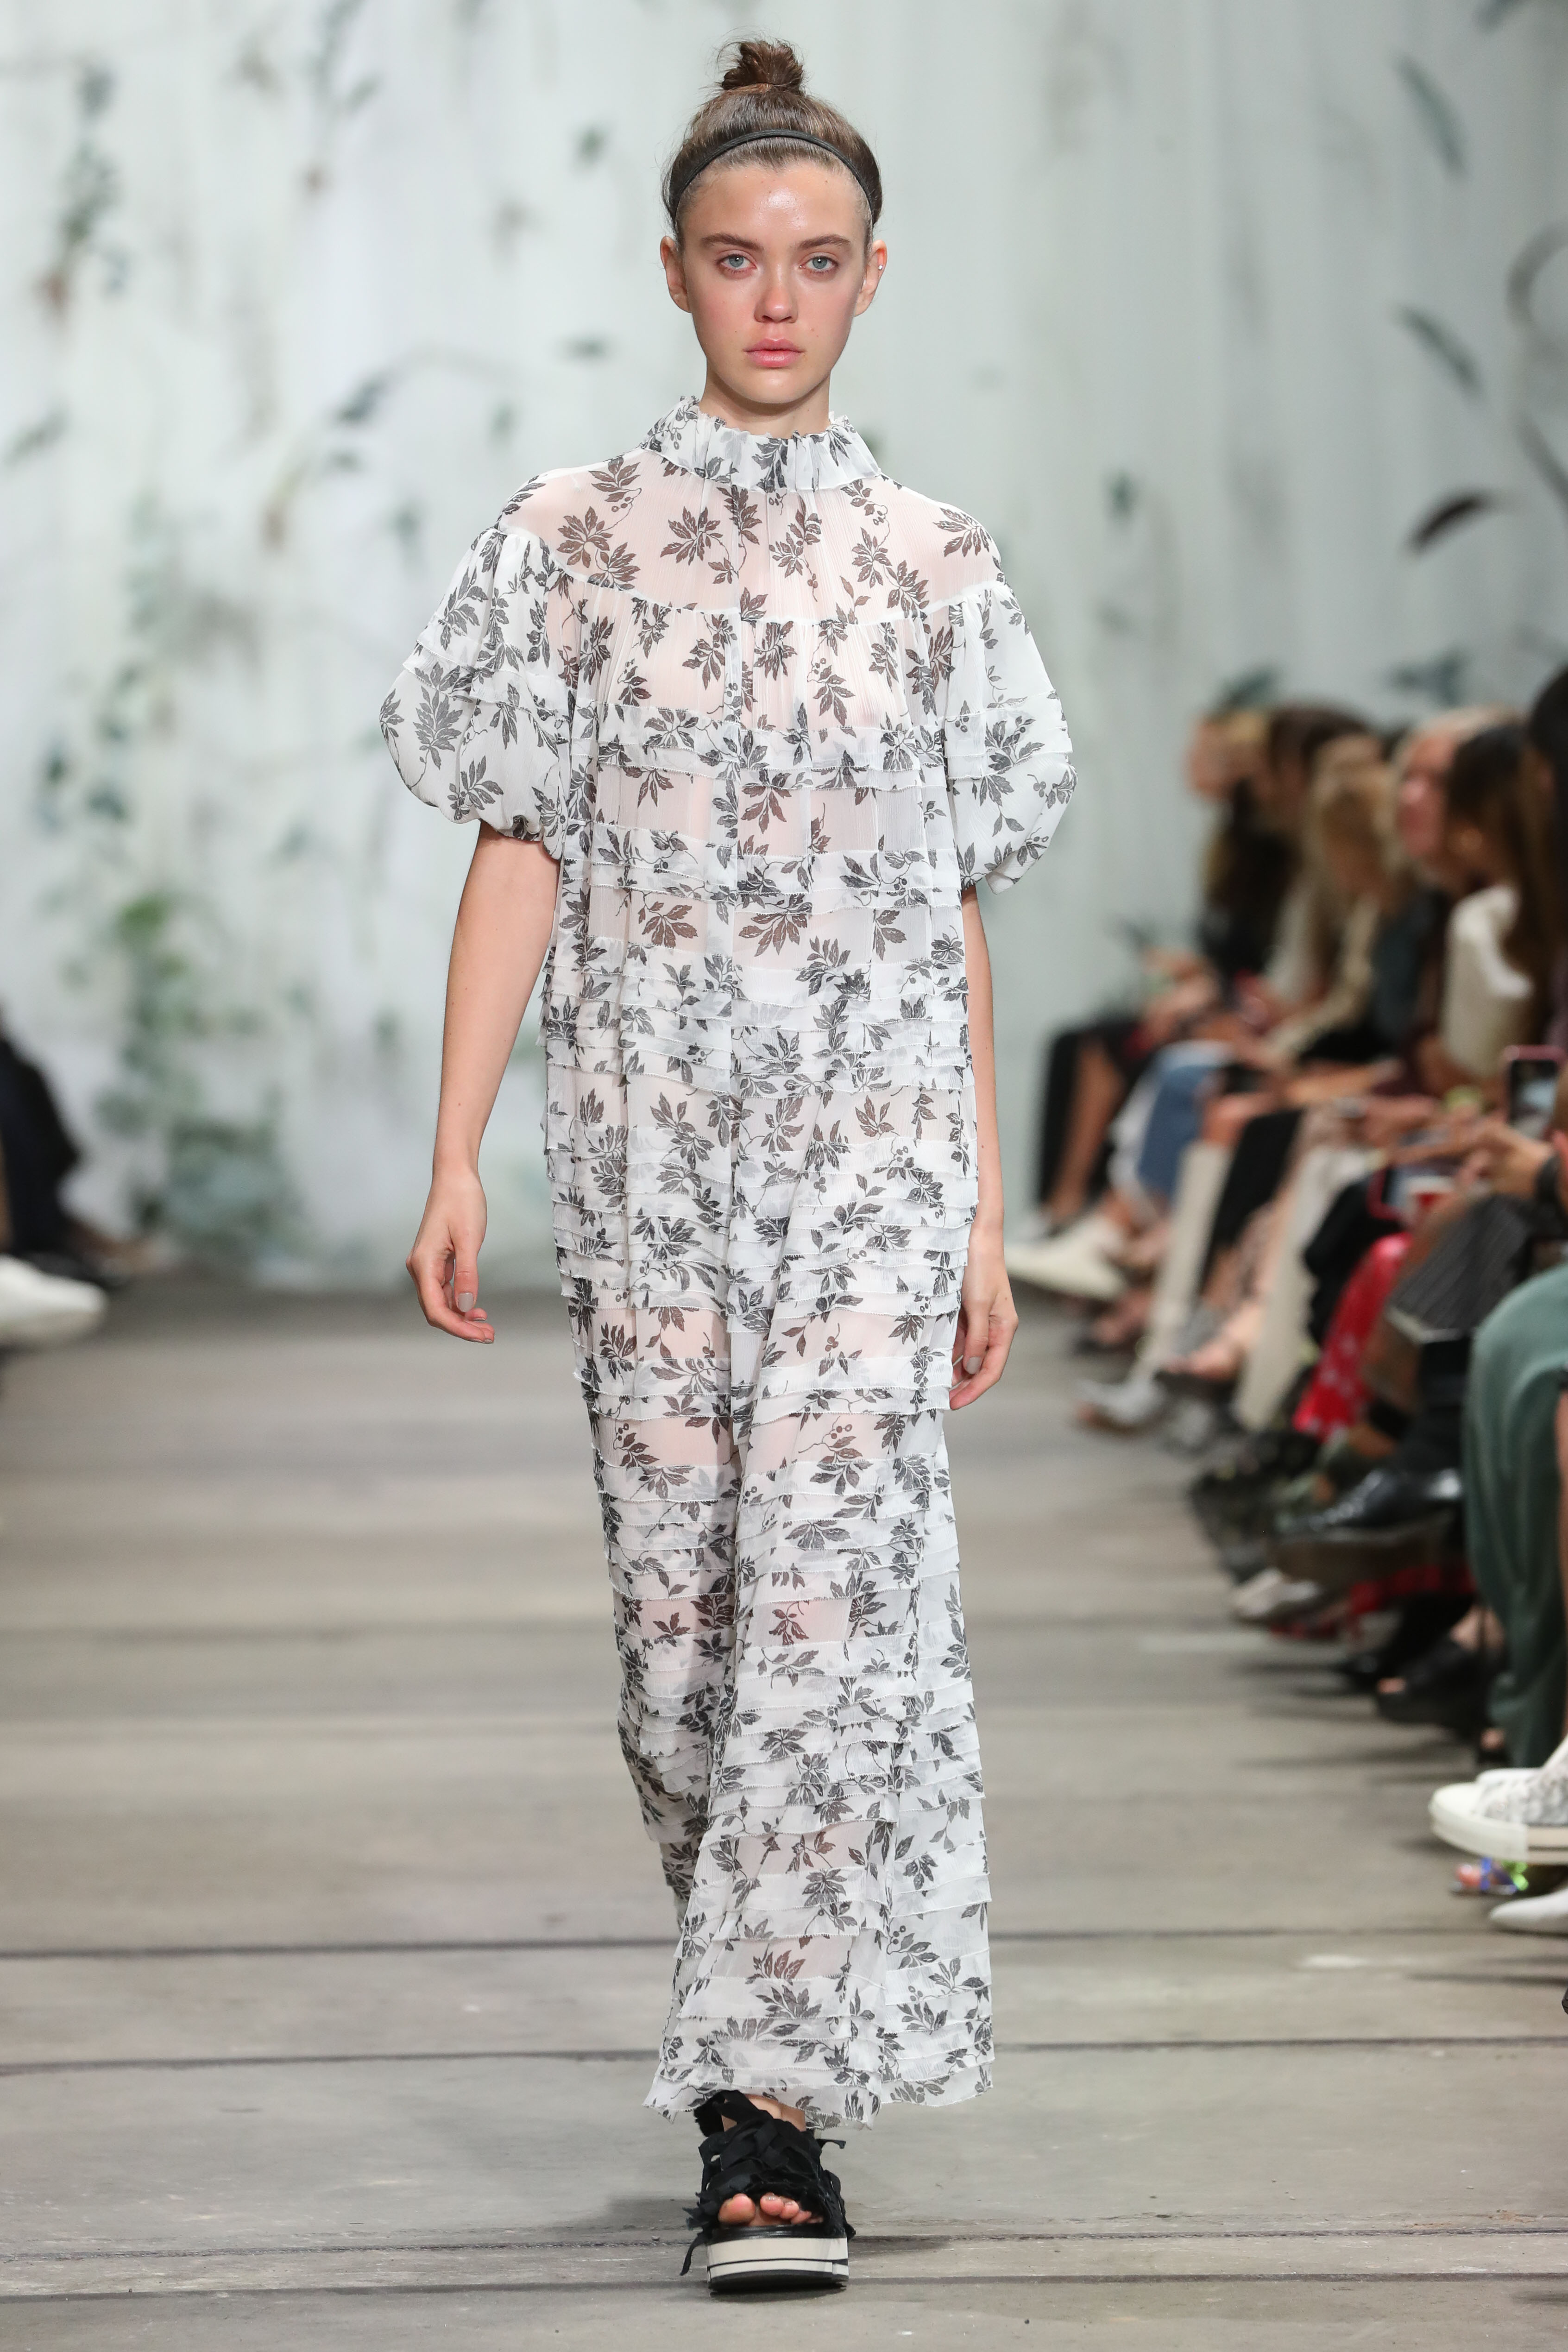 MBFWA: Lee Mathews’ Anniversary Collection Is A Lesson In Perfection